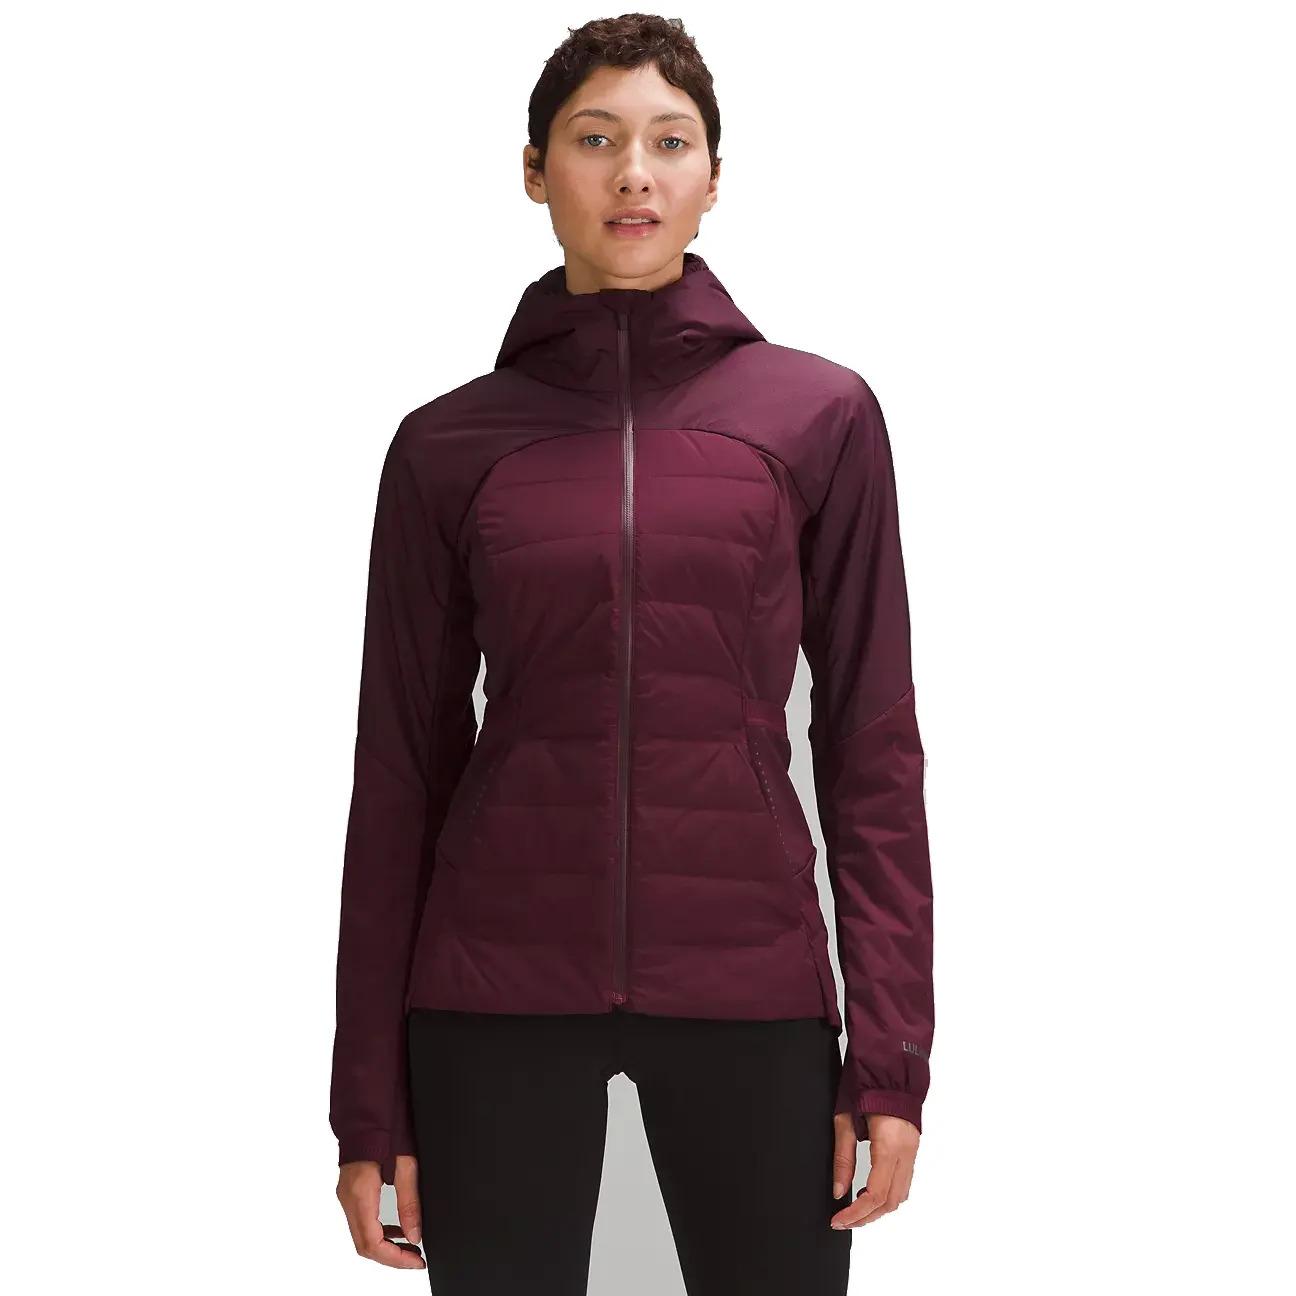 Lululemon Down for It All Jacket Small Size for $99 Shipped